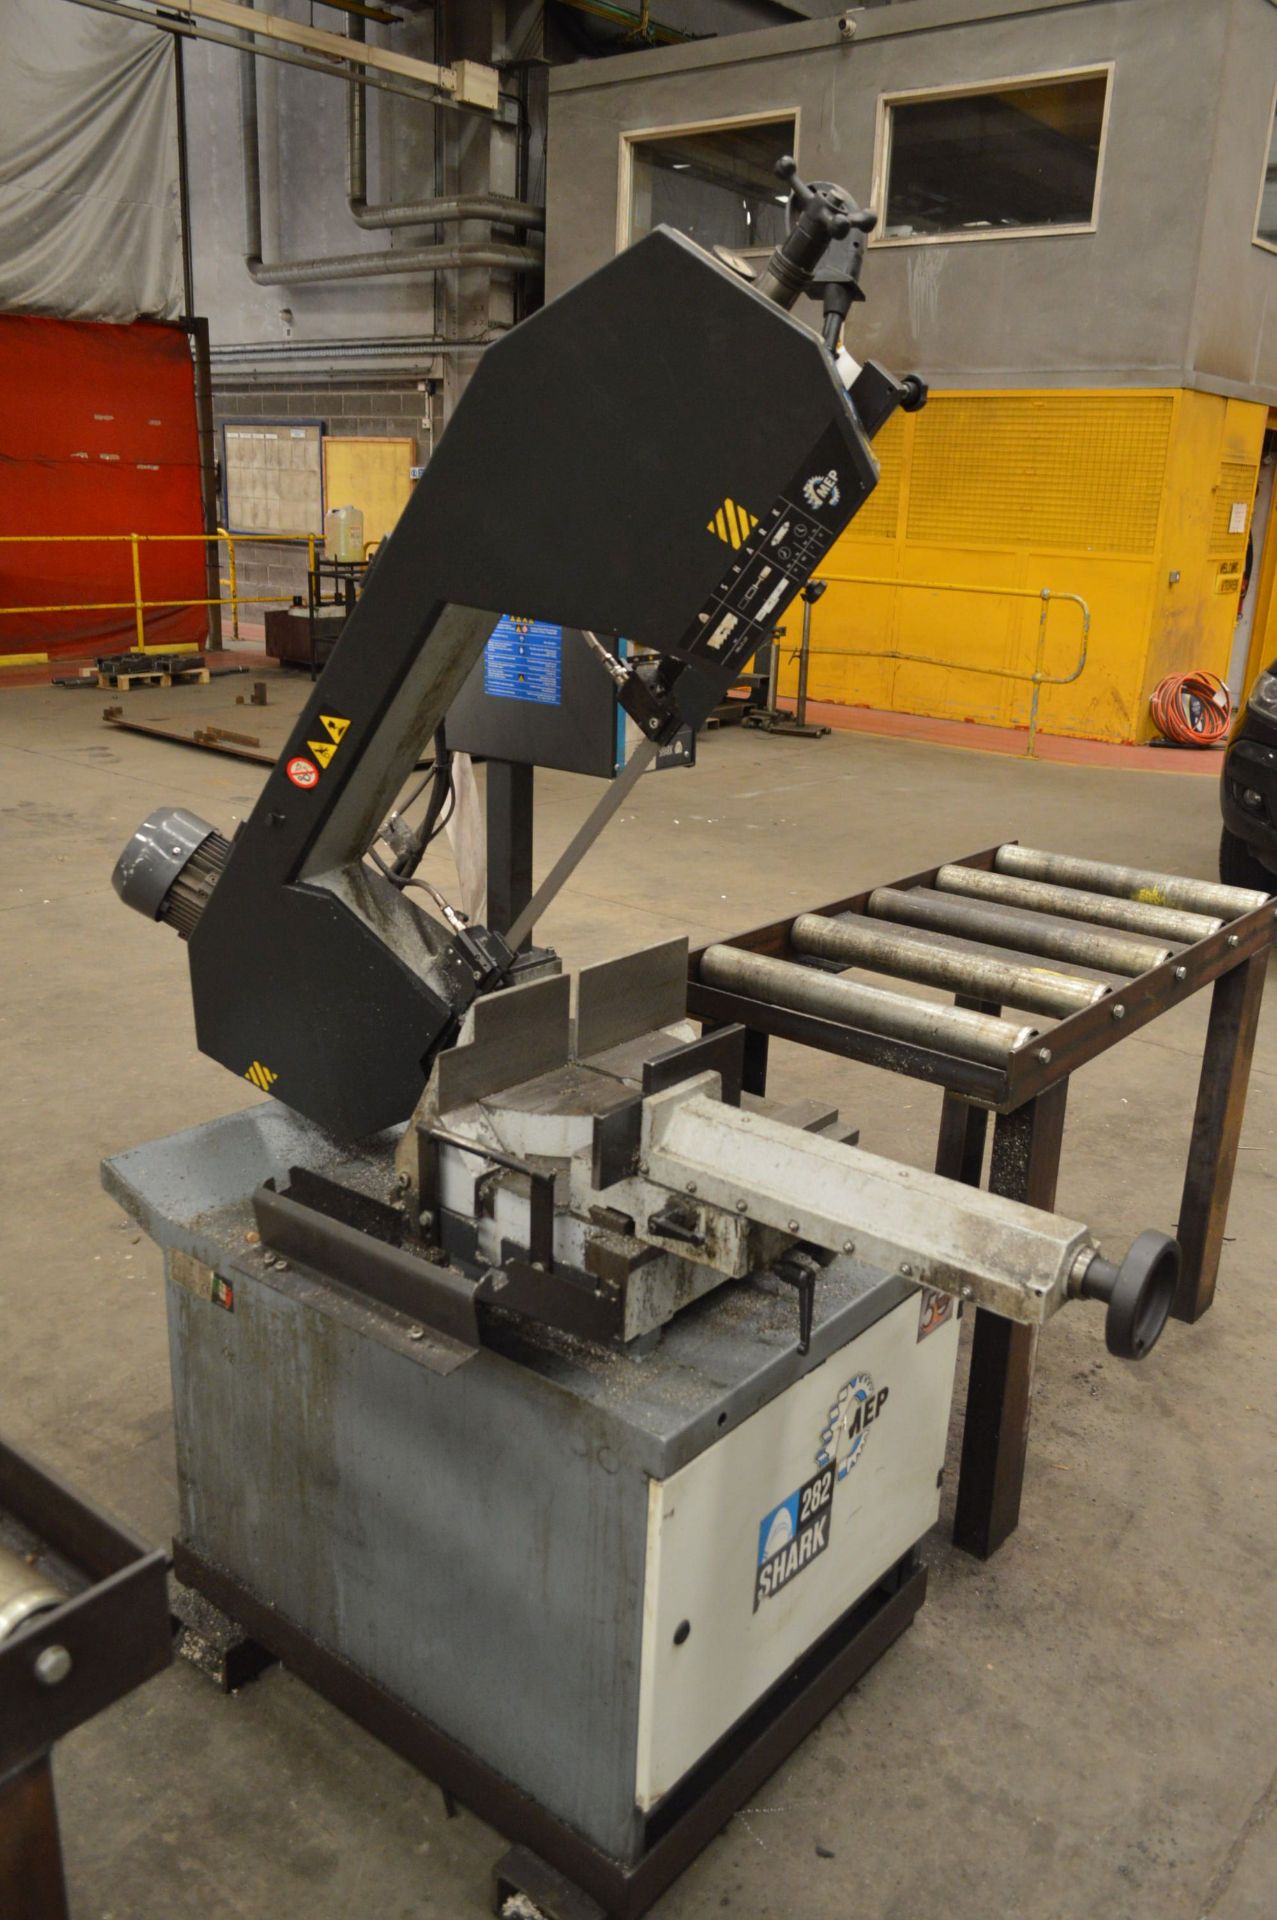 MEP SHARK 282 HORIZONTAL BAND SAW, serial no. 551507/44V, year of manufacture 2014, with infeed - Bild 3 aus 5